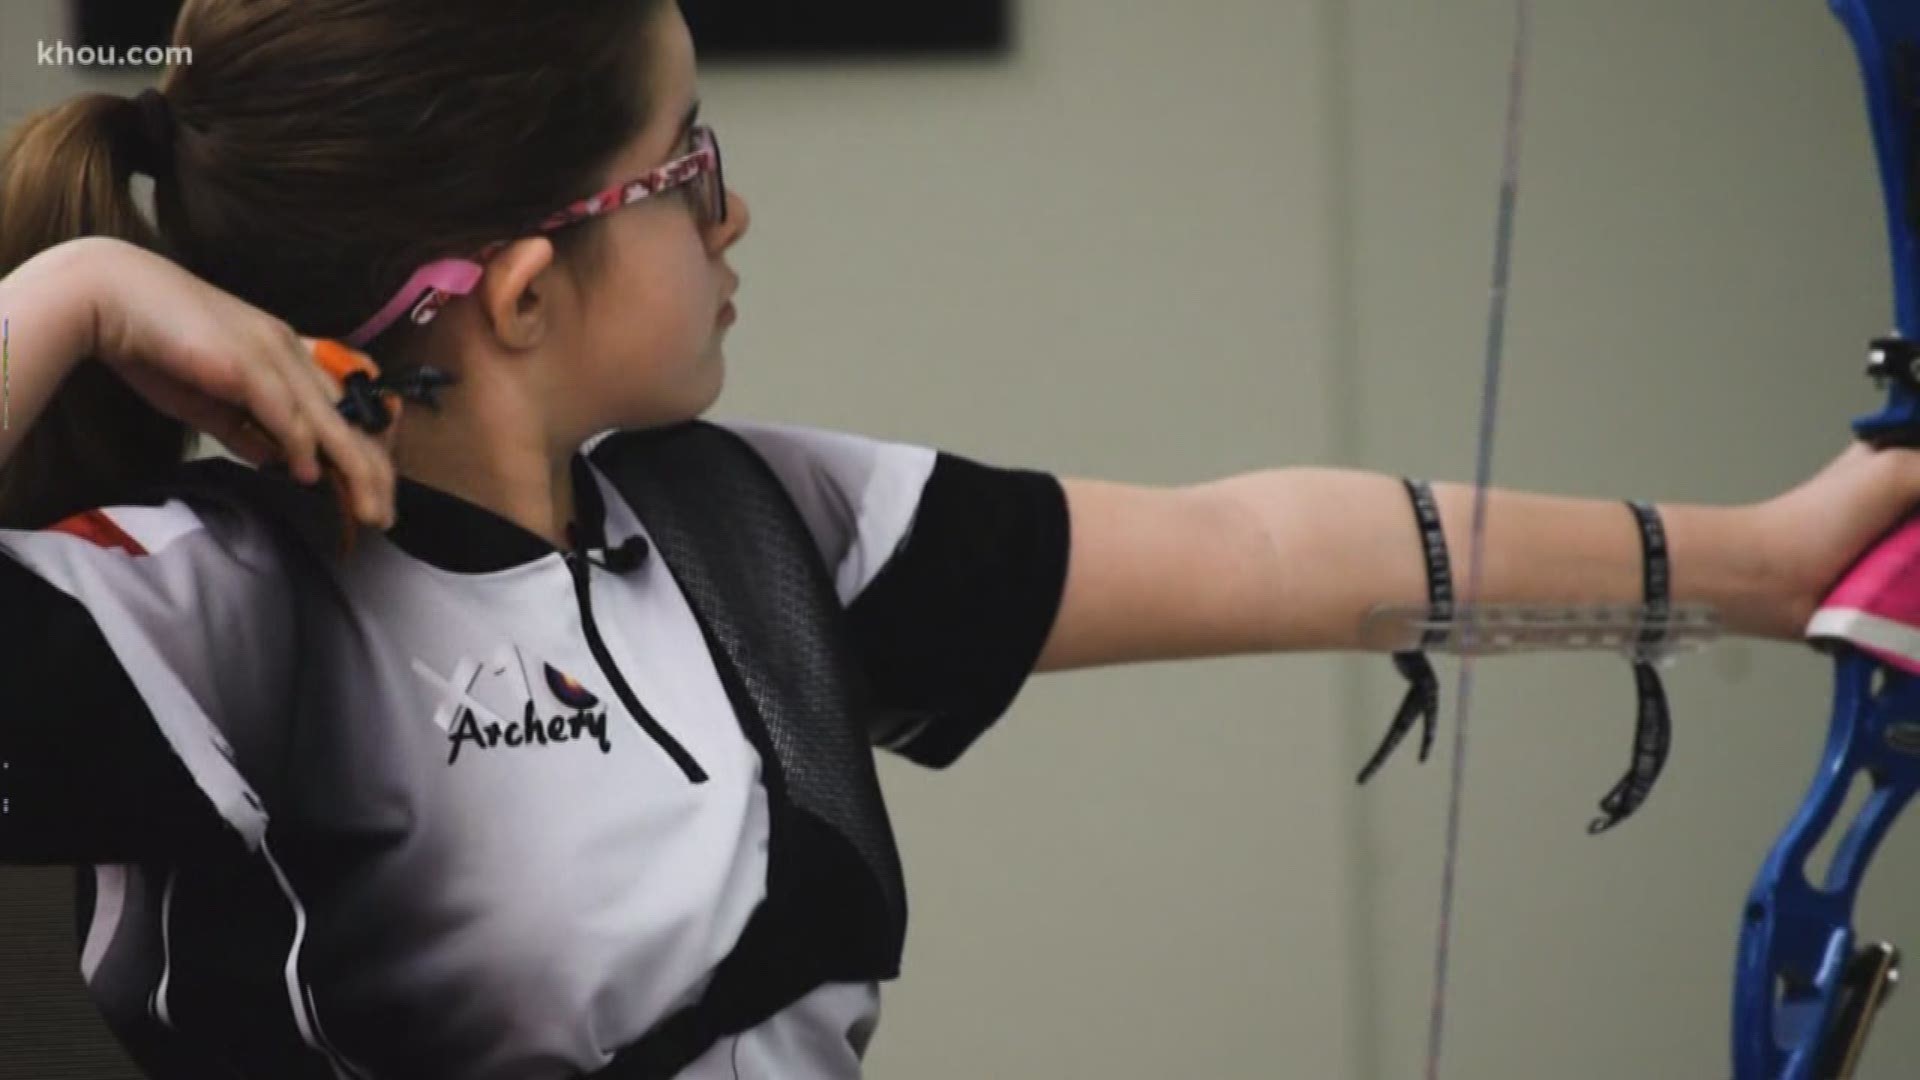 Some people never realize what they want to do with their life. When a child figures out their dream, it’s remarkable and 11-year-old Kim Garcia of Pearland has done just that.